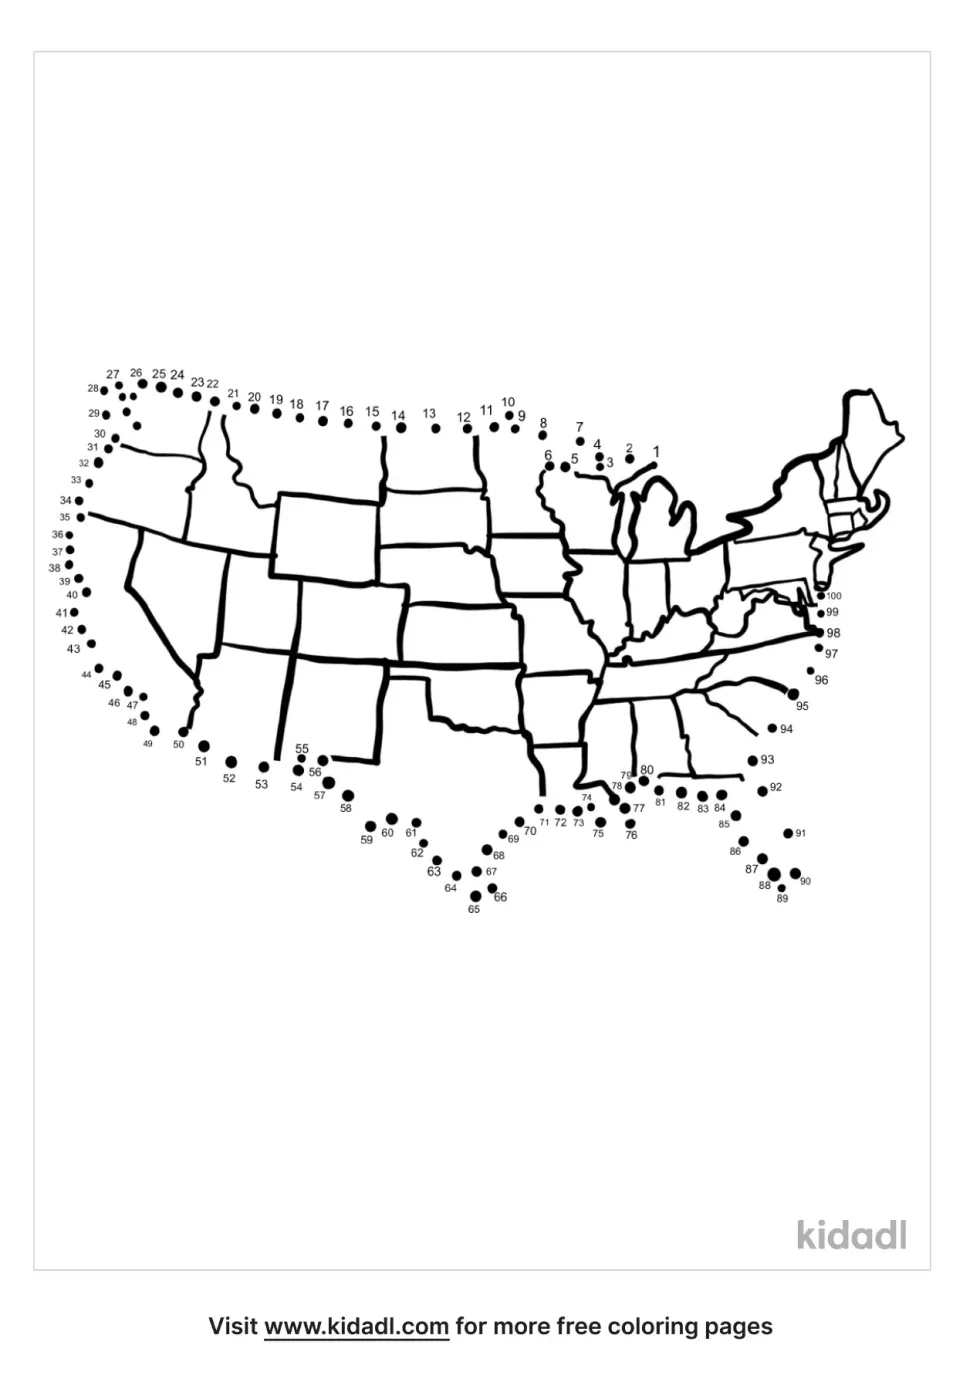 All 50 States